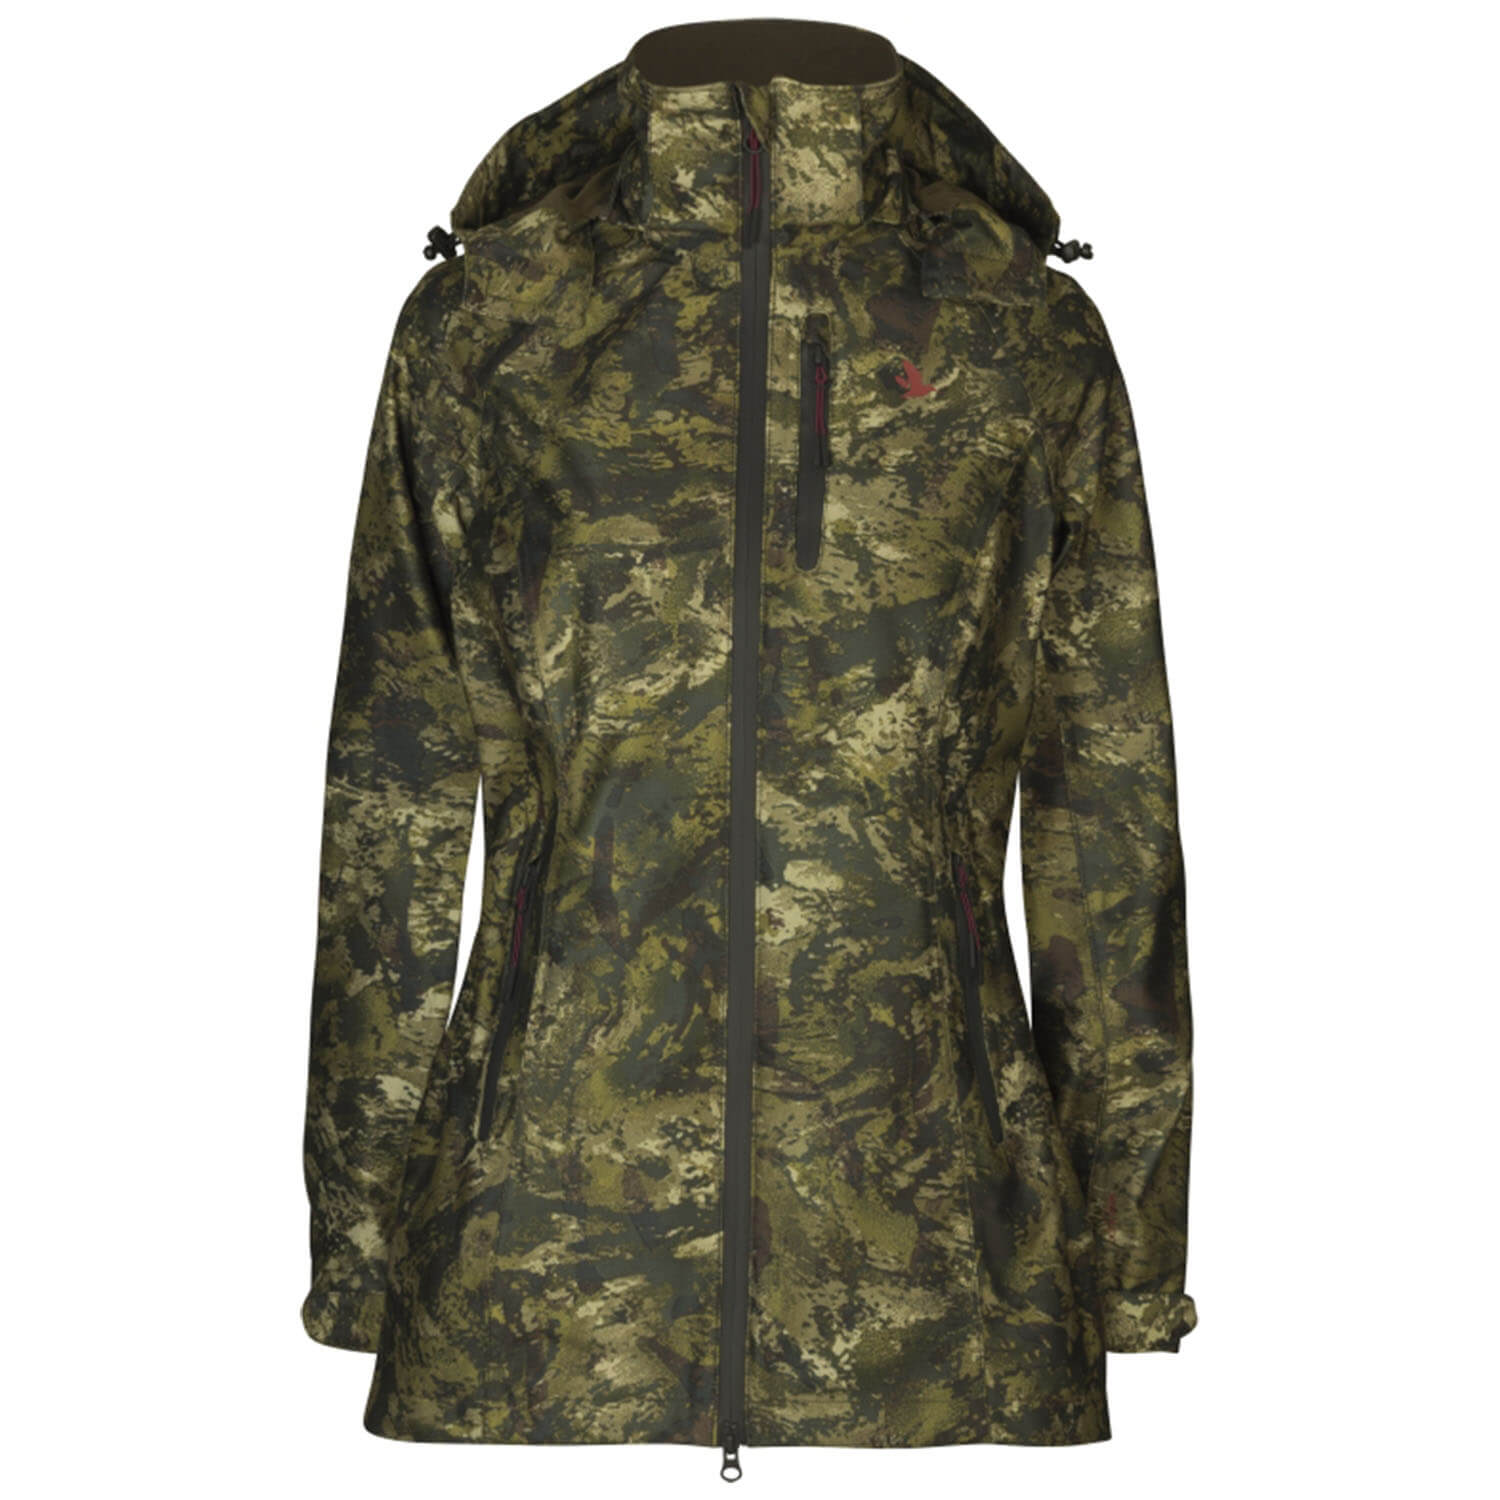 Seeland womens jacket Avail (InVis) - Women's Hunting Clothing 